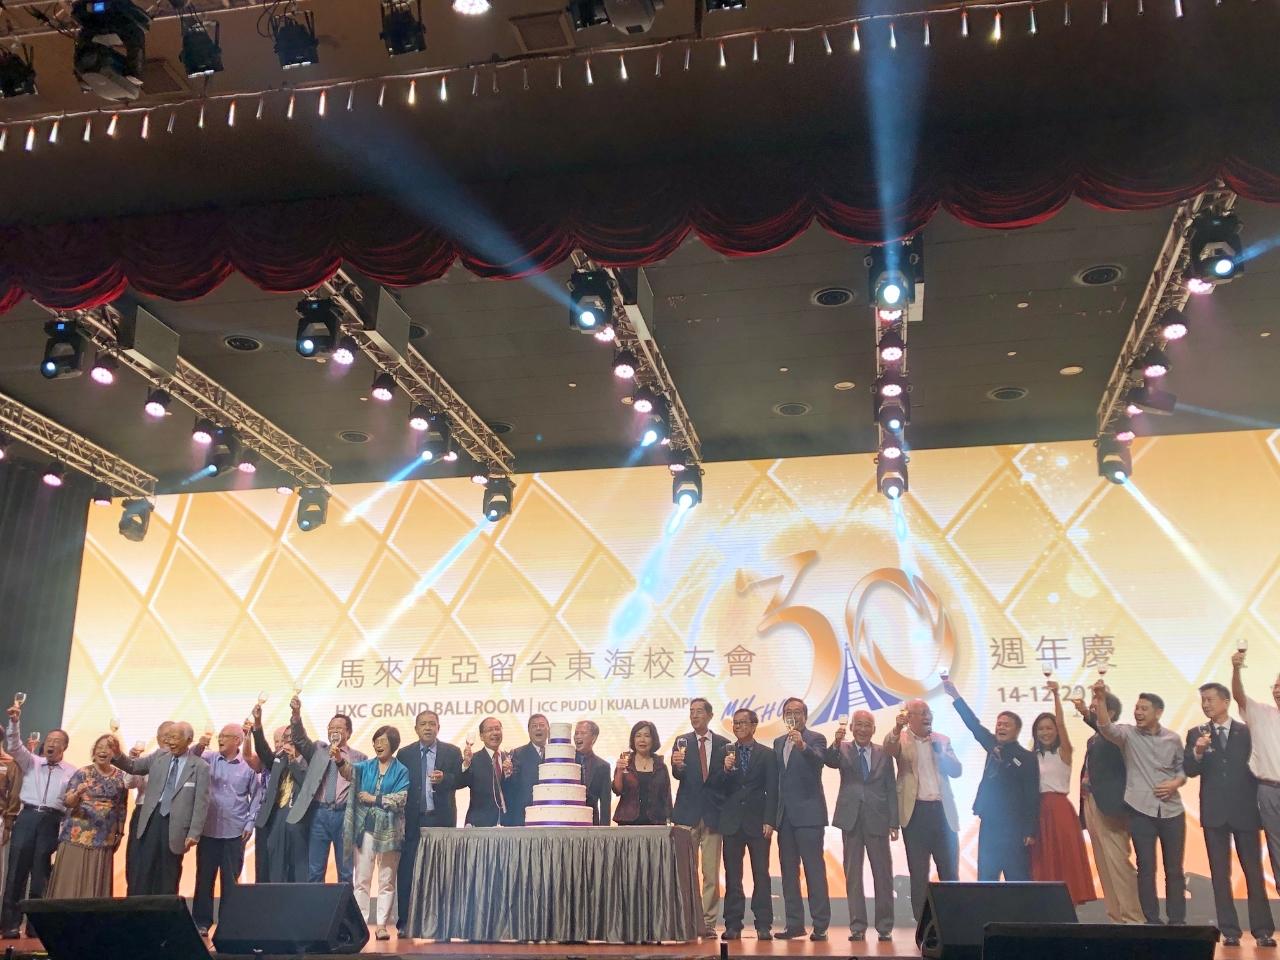 Representative Anne Hung (center) and VIPs  toast to celebrate the 30th anniversary of Persatuan Siswazah University Tunghai Taiwan, Malaysia.